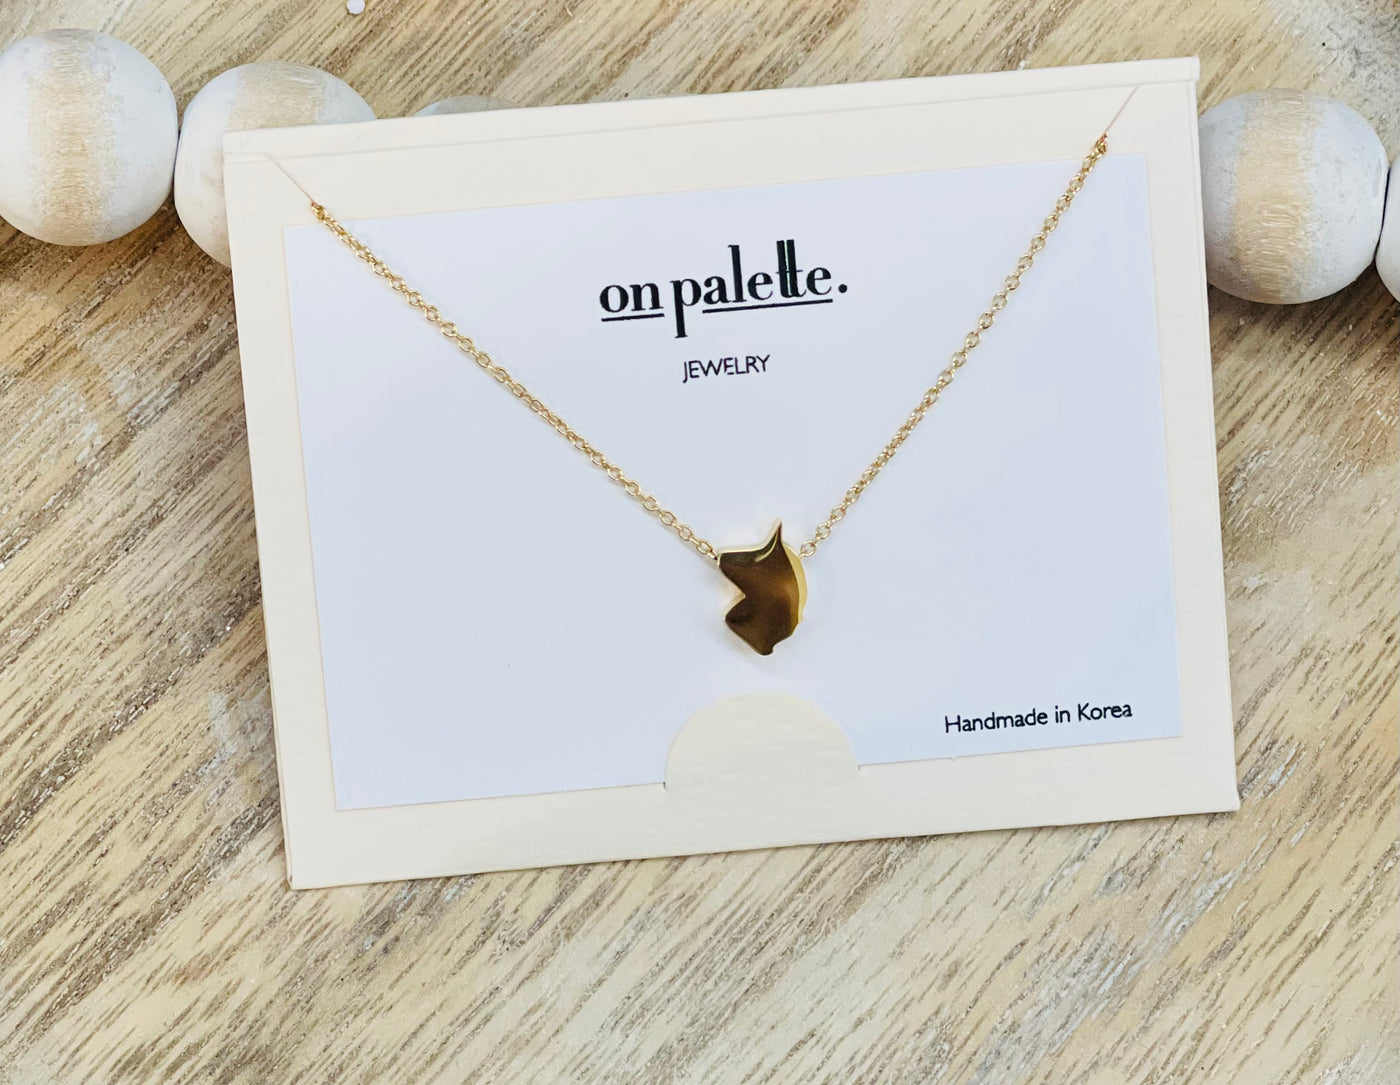 The Golden Horse Necklace